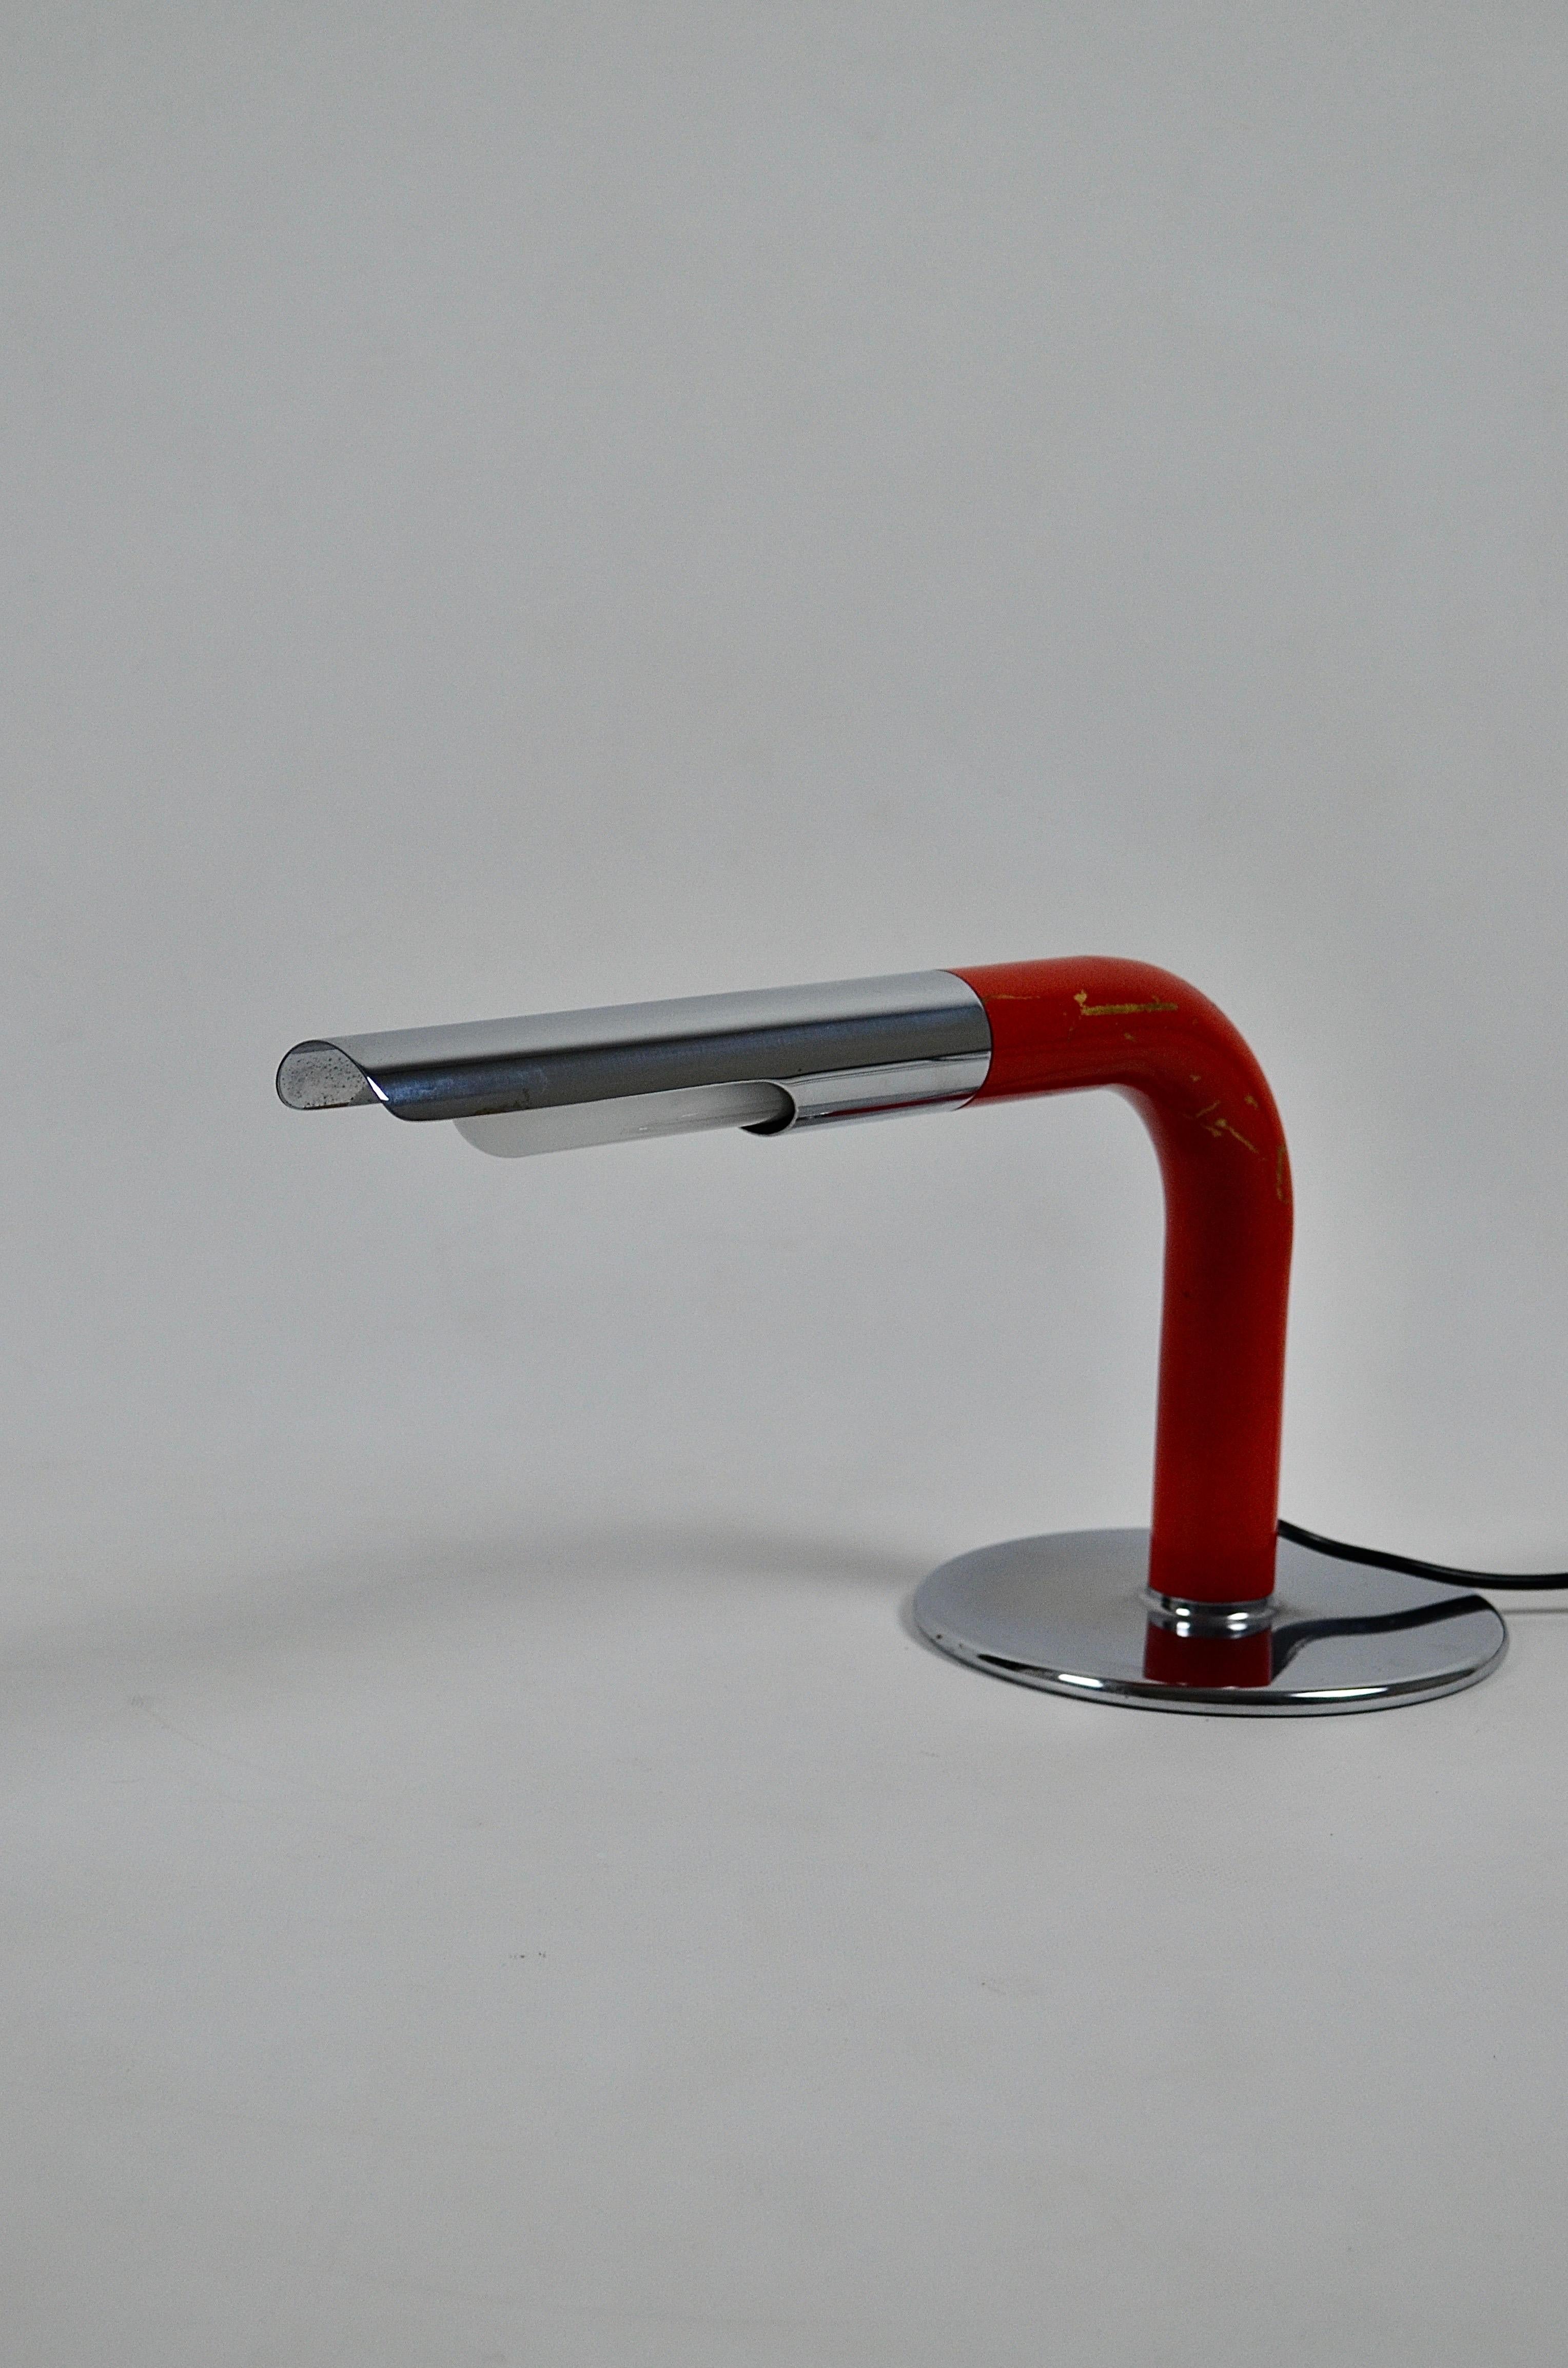 The Gulp lamp was designed by the famous lamp designer, Ingo Maurer from the 1960s. The shape is simple and very elegant, it is made up of a pipe that bends at an angle of 90 degrees and cut open at the front end. Below it goes into a rotating plate